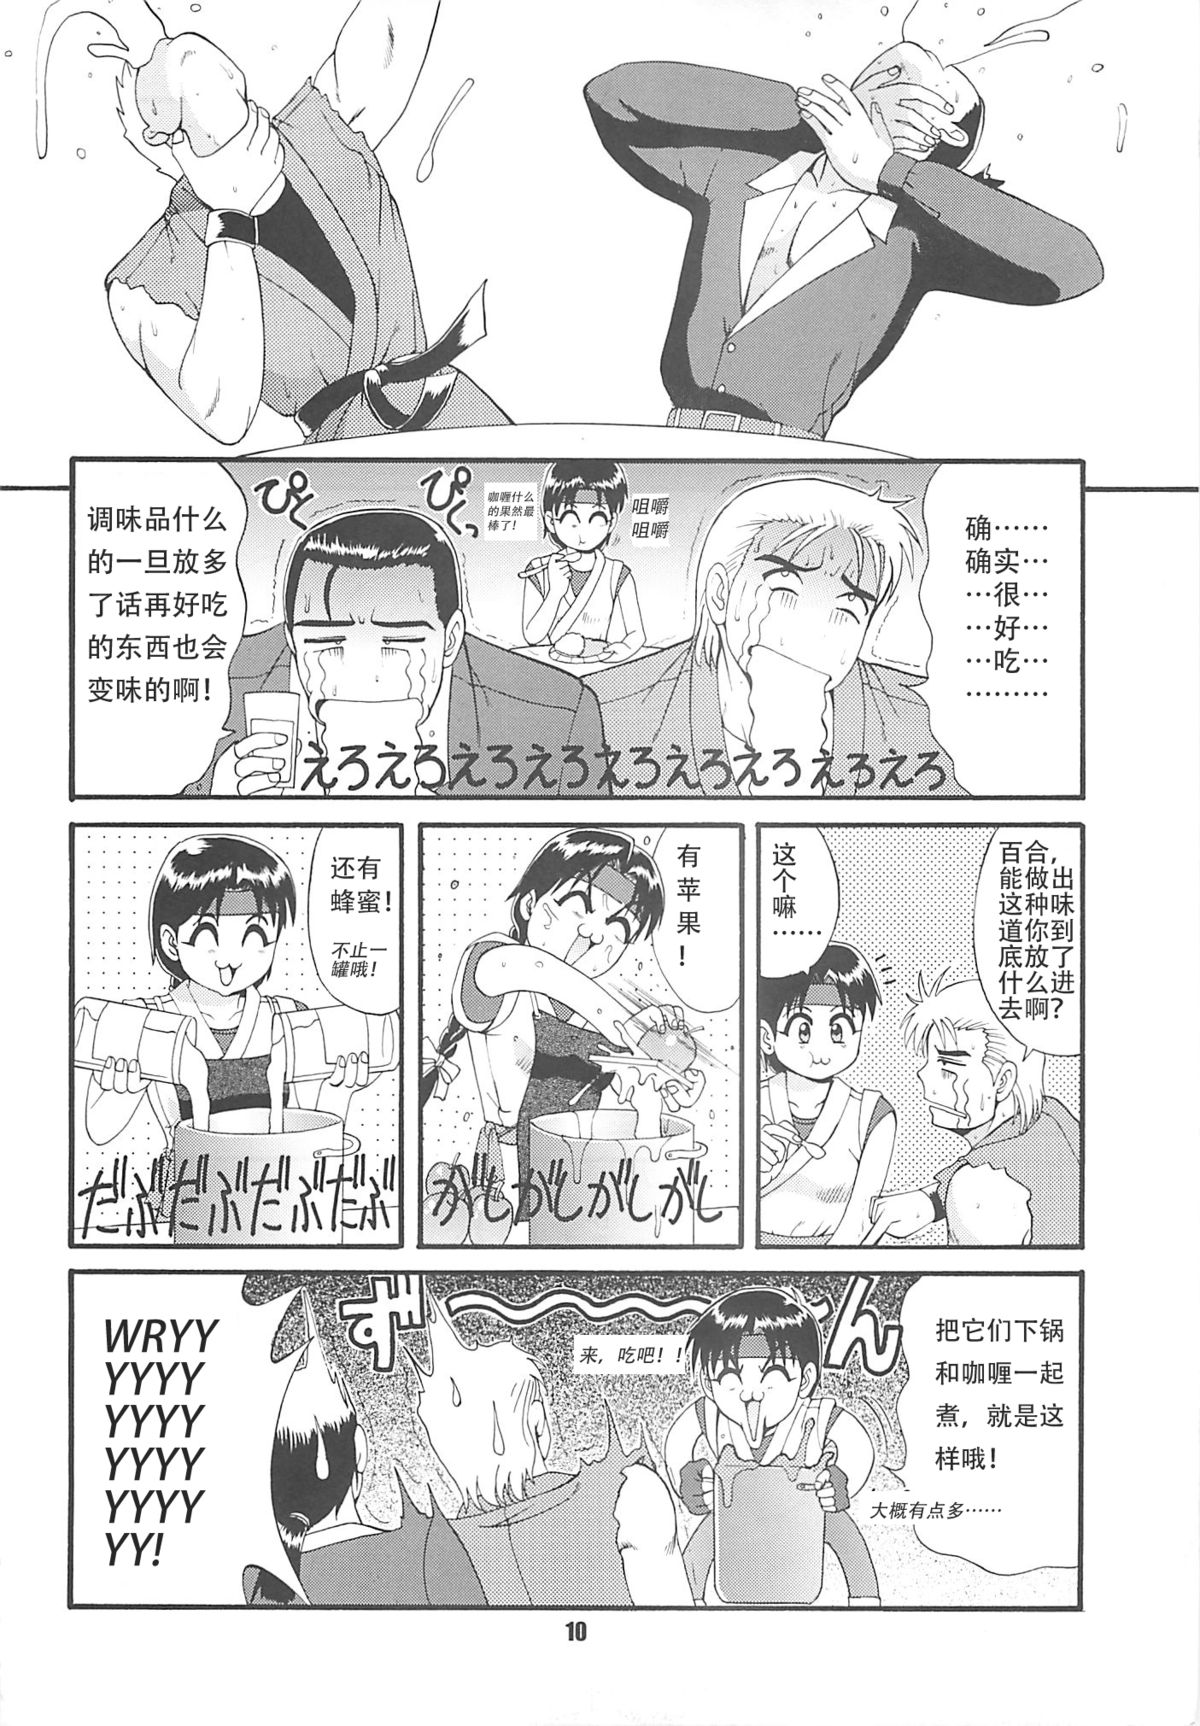 (CR22) [Saigado (Ishoku Dougen)] The Yuri & Friends '97 (King of Fighters) [Chinese] page 10 full